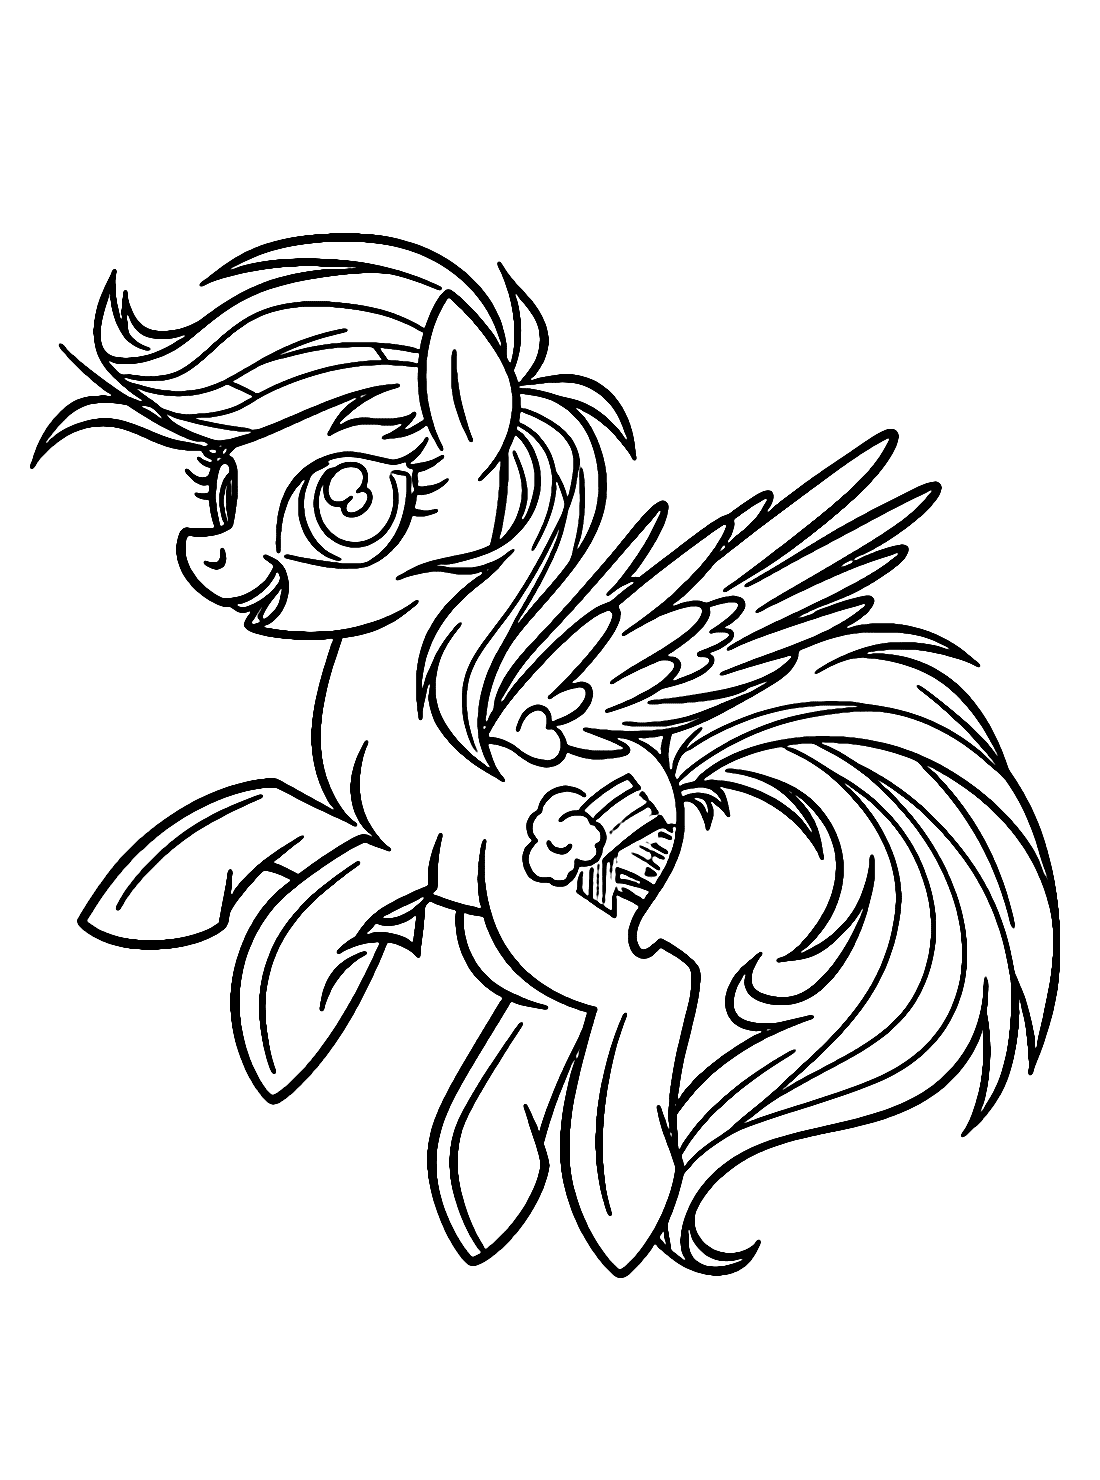 Baby Rainbow Dash Coloring Pages